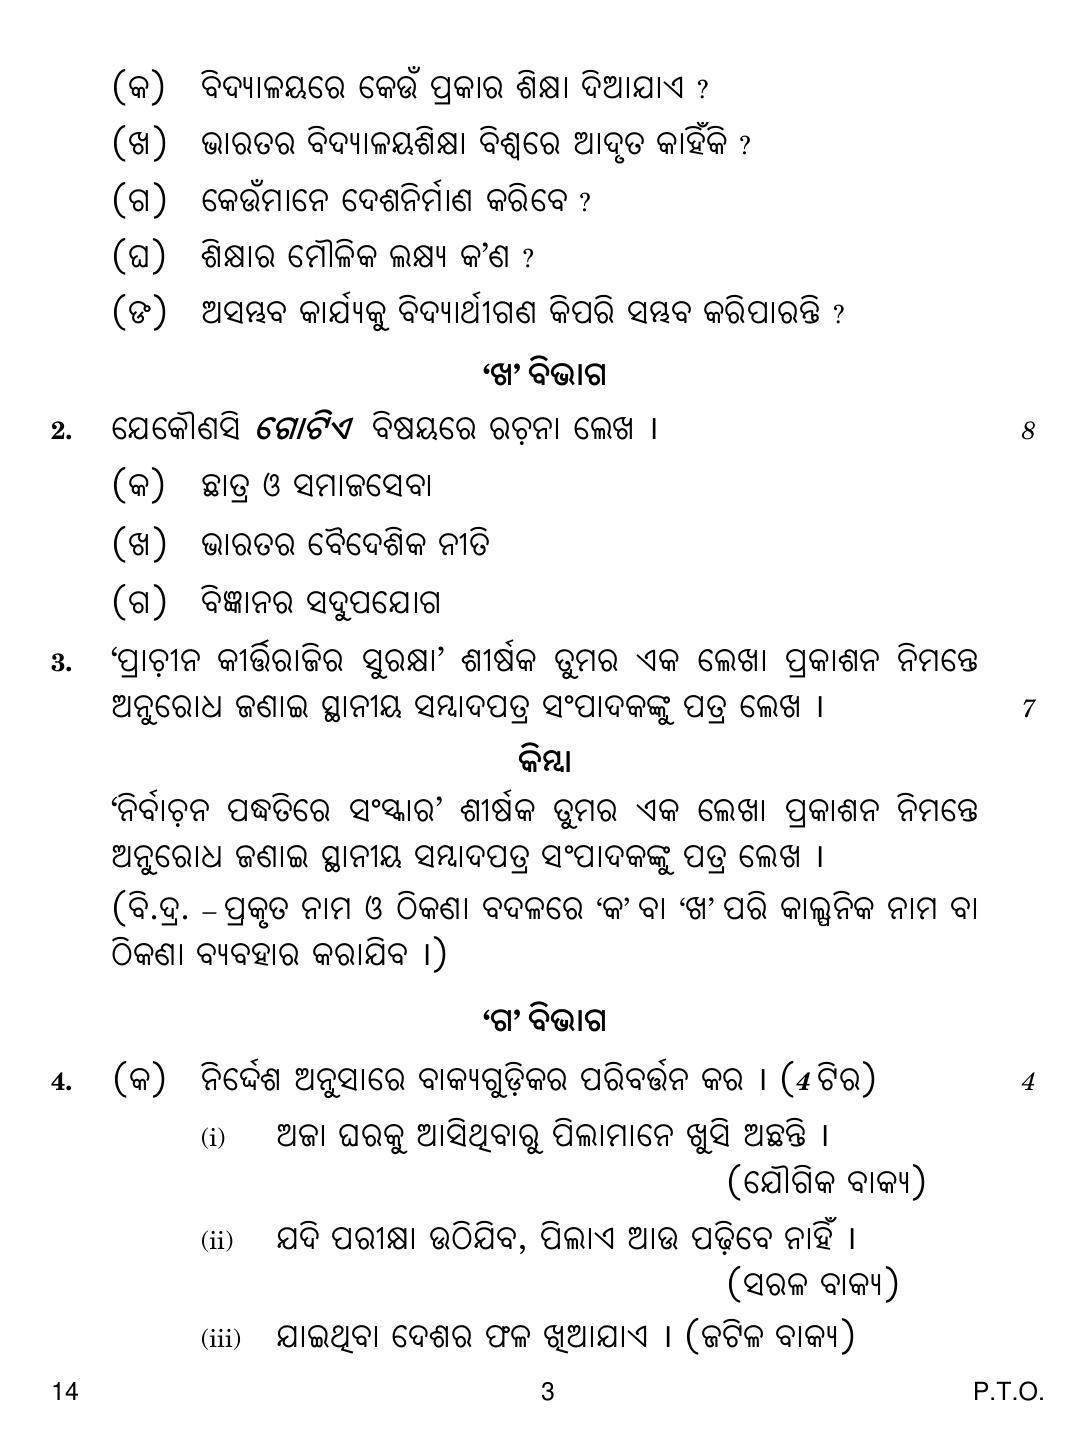 CBSE Class 10 14 Odia 2019 Question Paper - Page 3